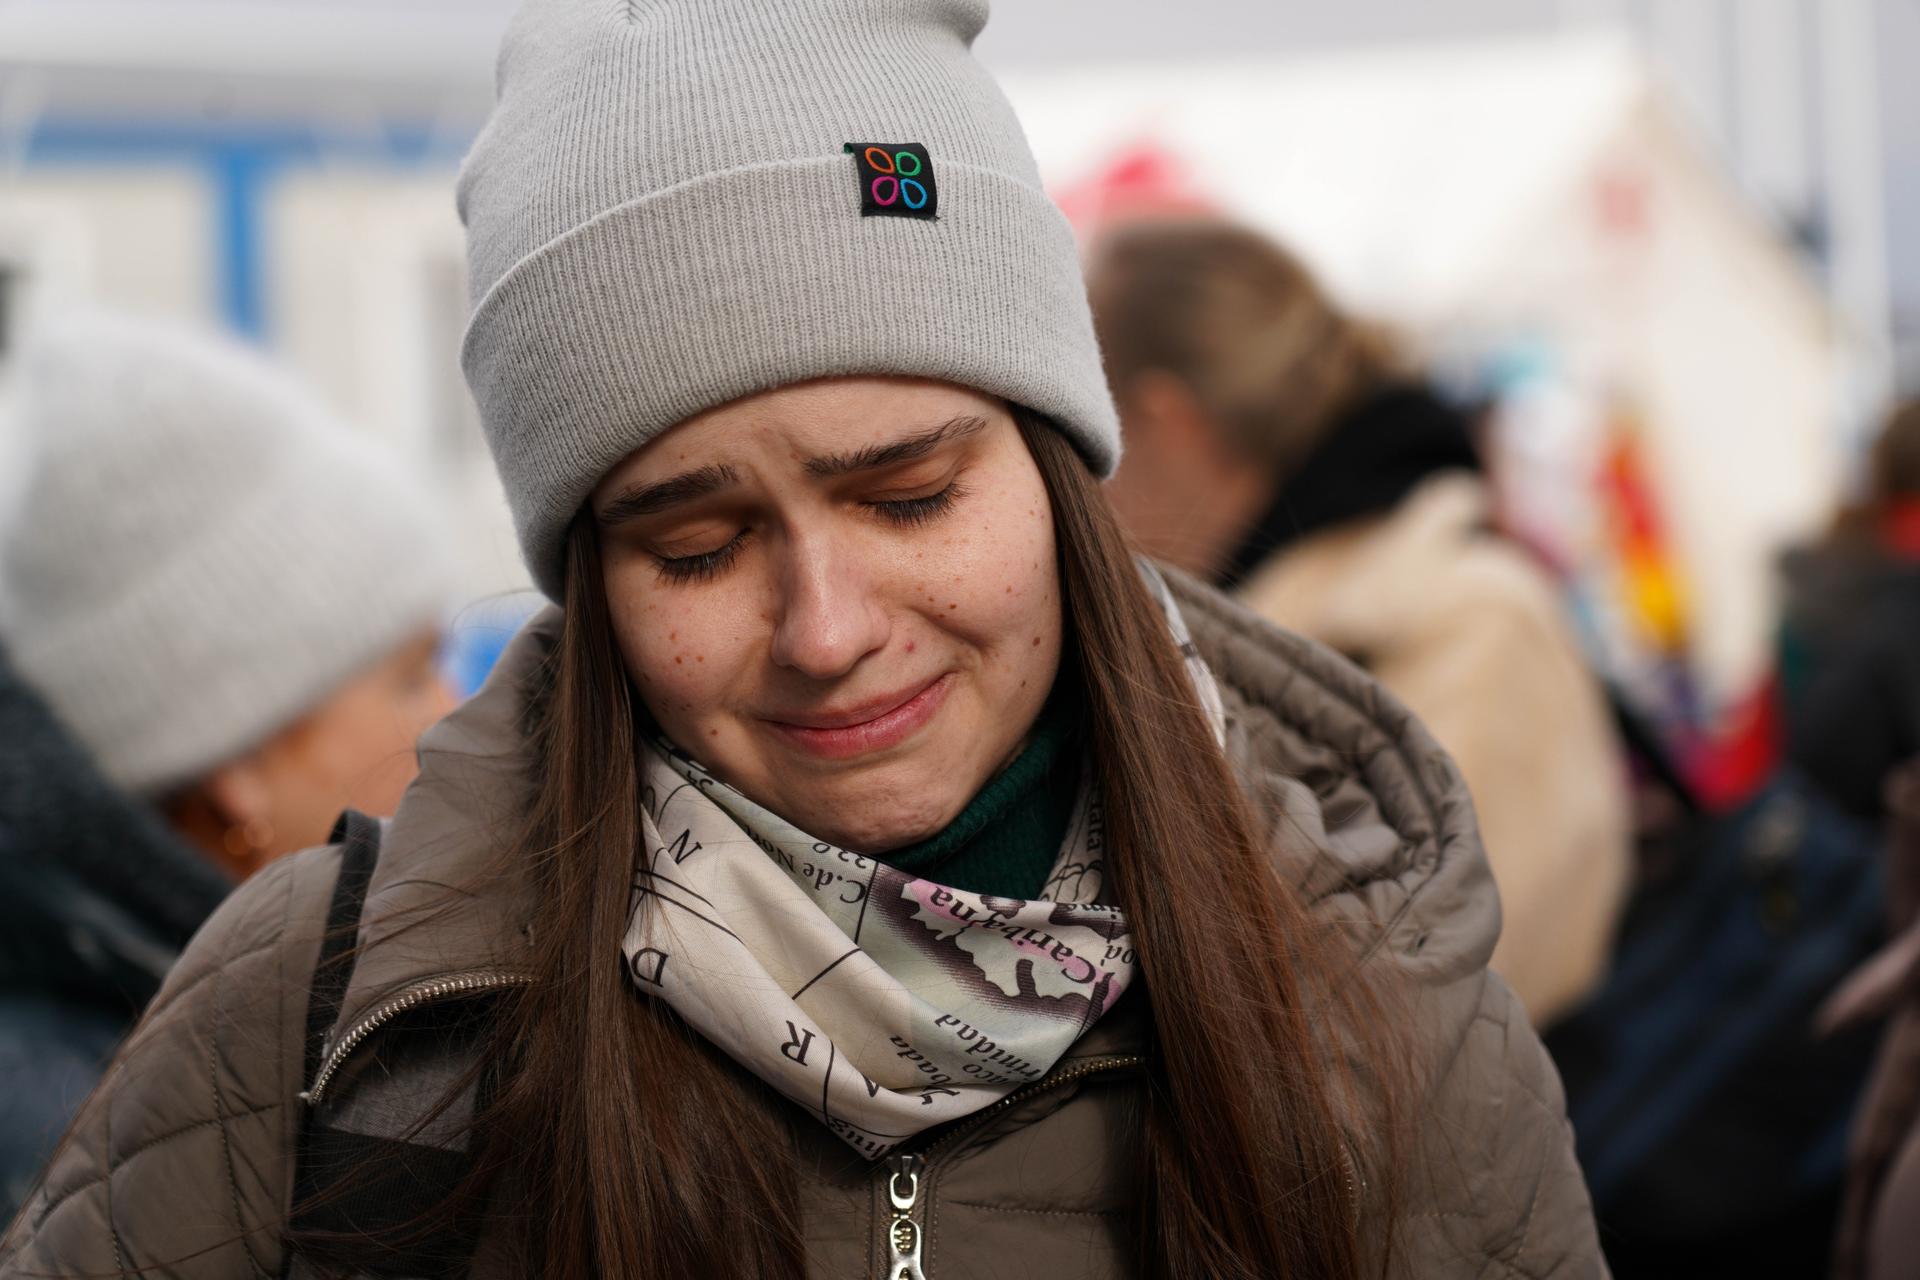 Anna, a Ukrainian refugee who has just arrived in Isaccea, on Romania’s southern border, said that she feels let down by the international community.